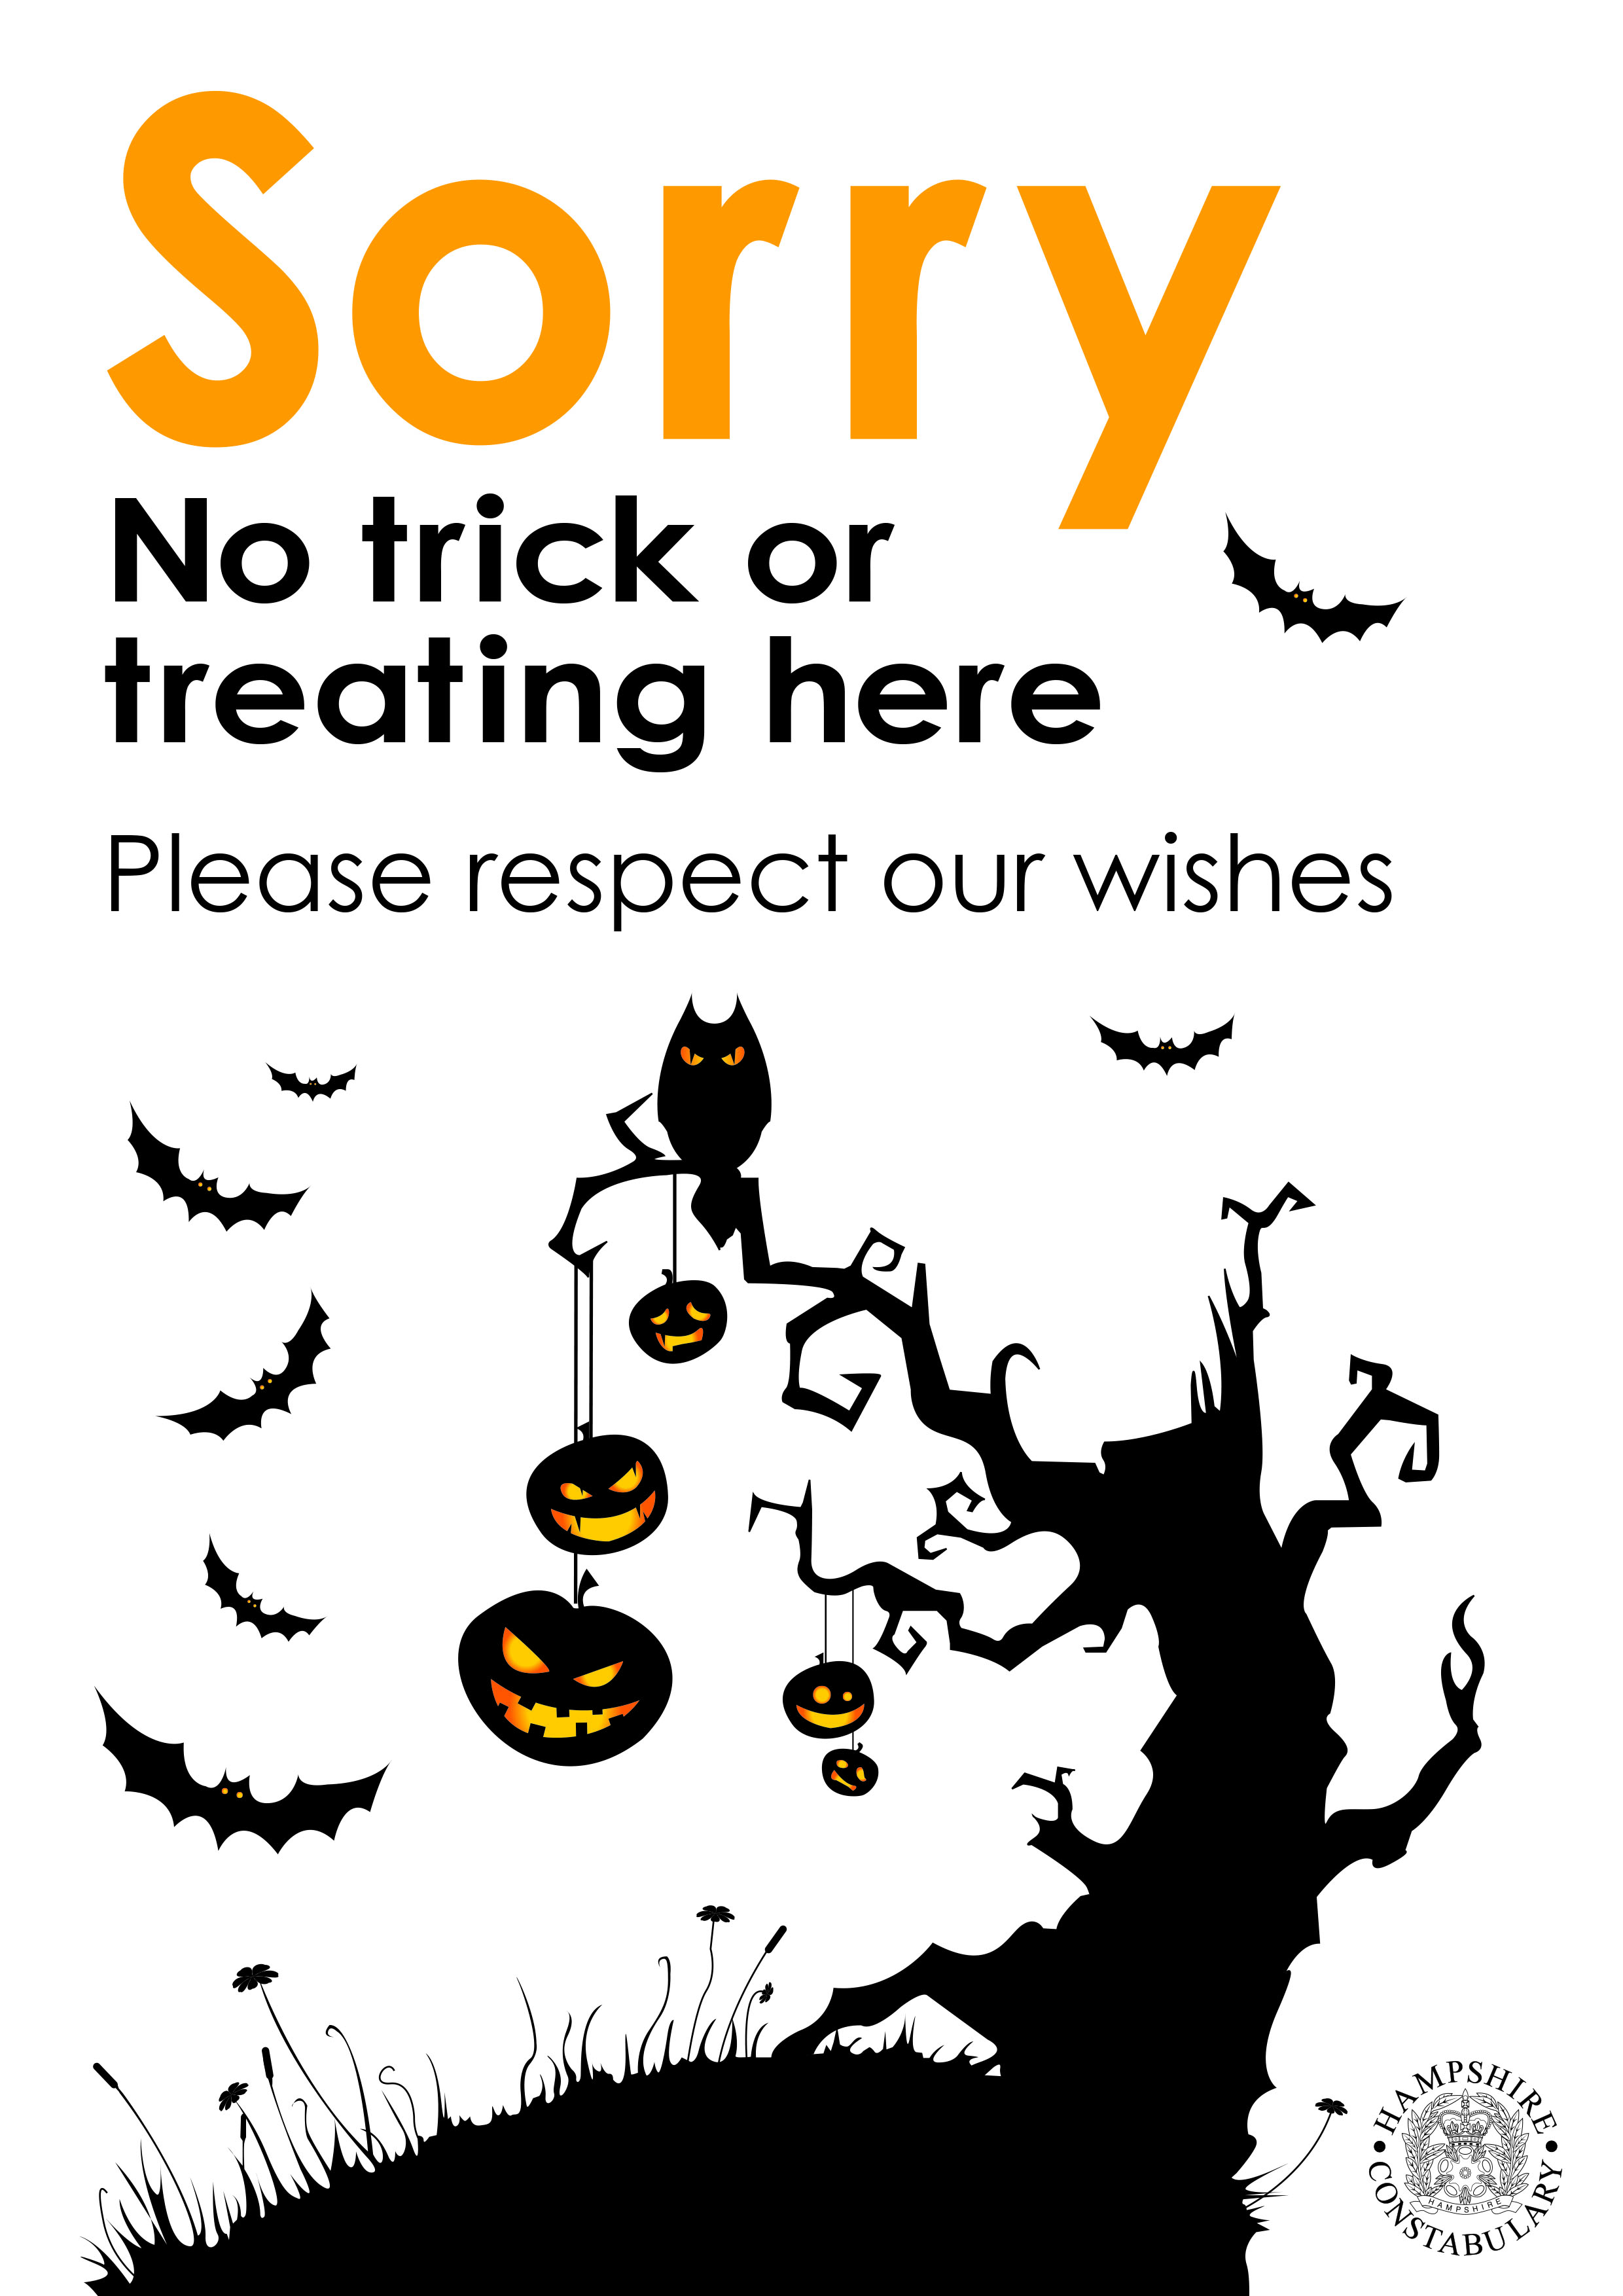 download-no-trick-or-treating-poster-from-the-hampshire-constabulary